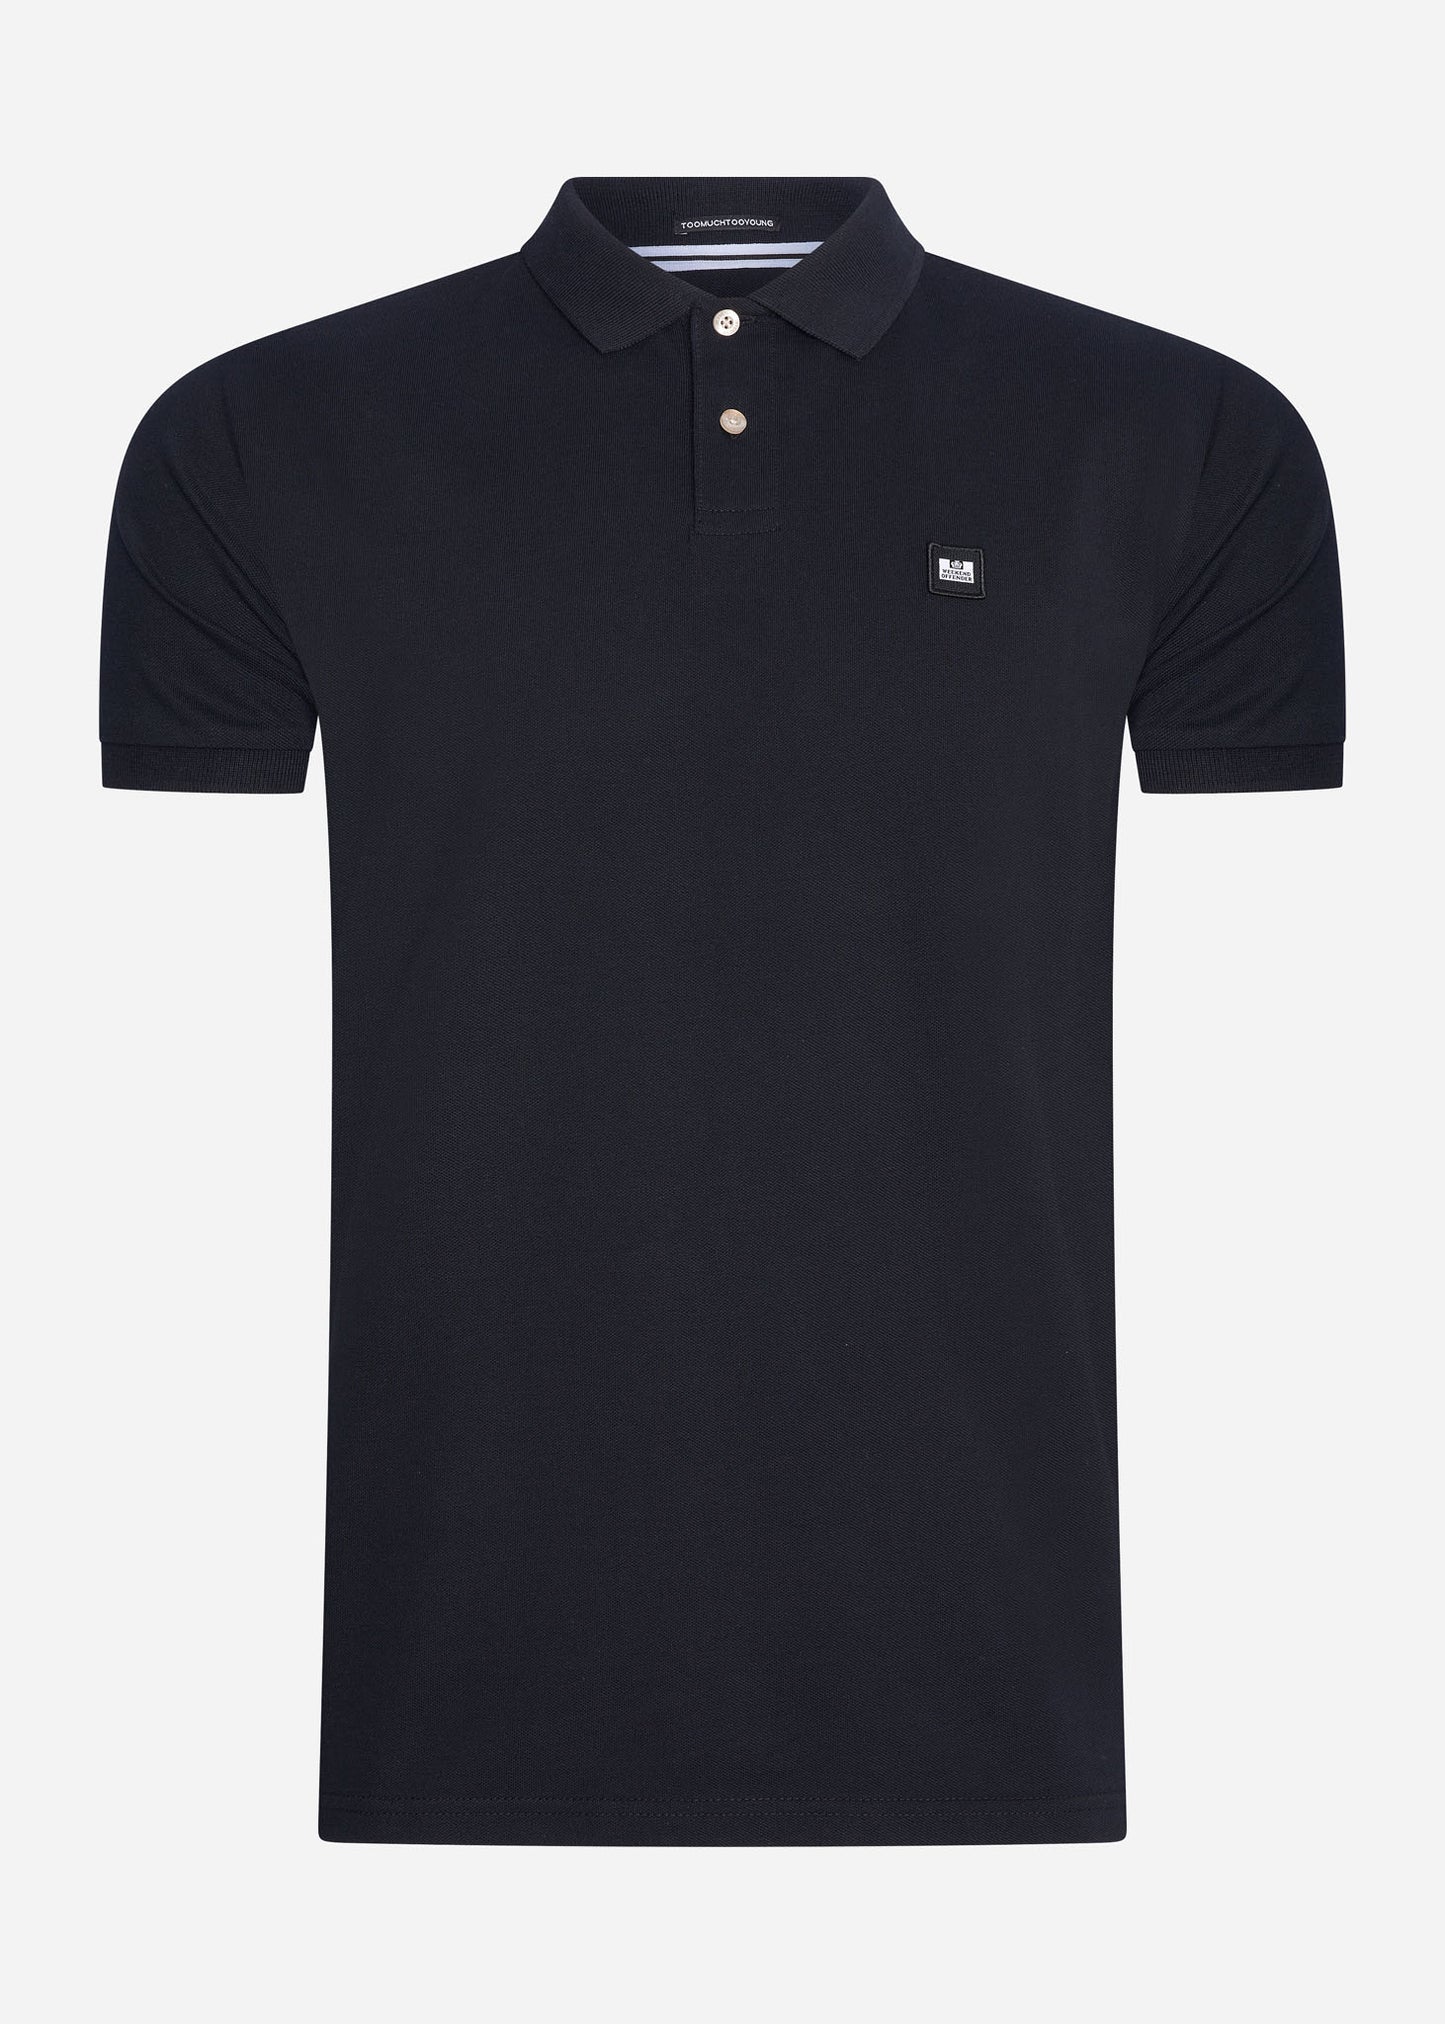 weekend offender polo black